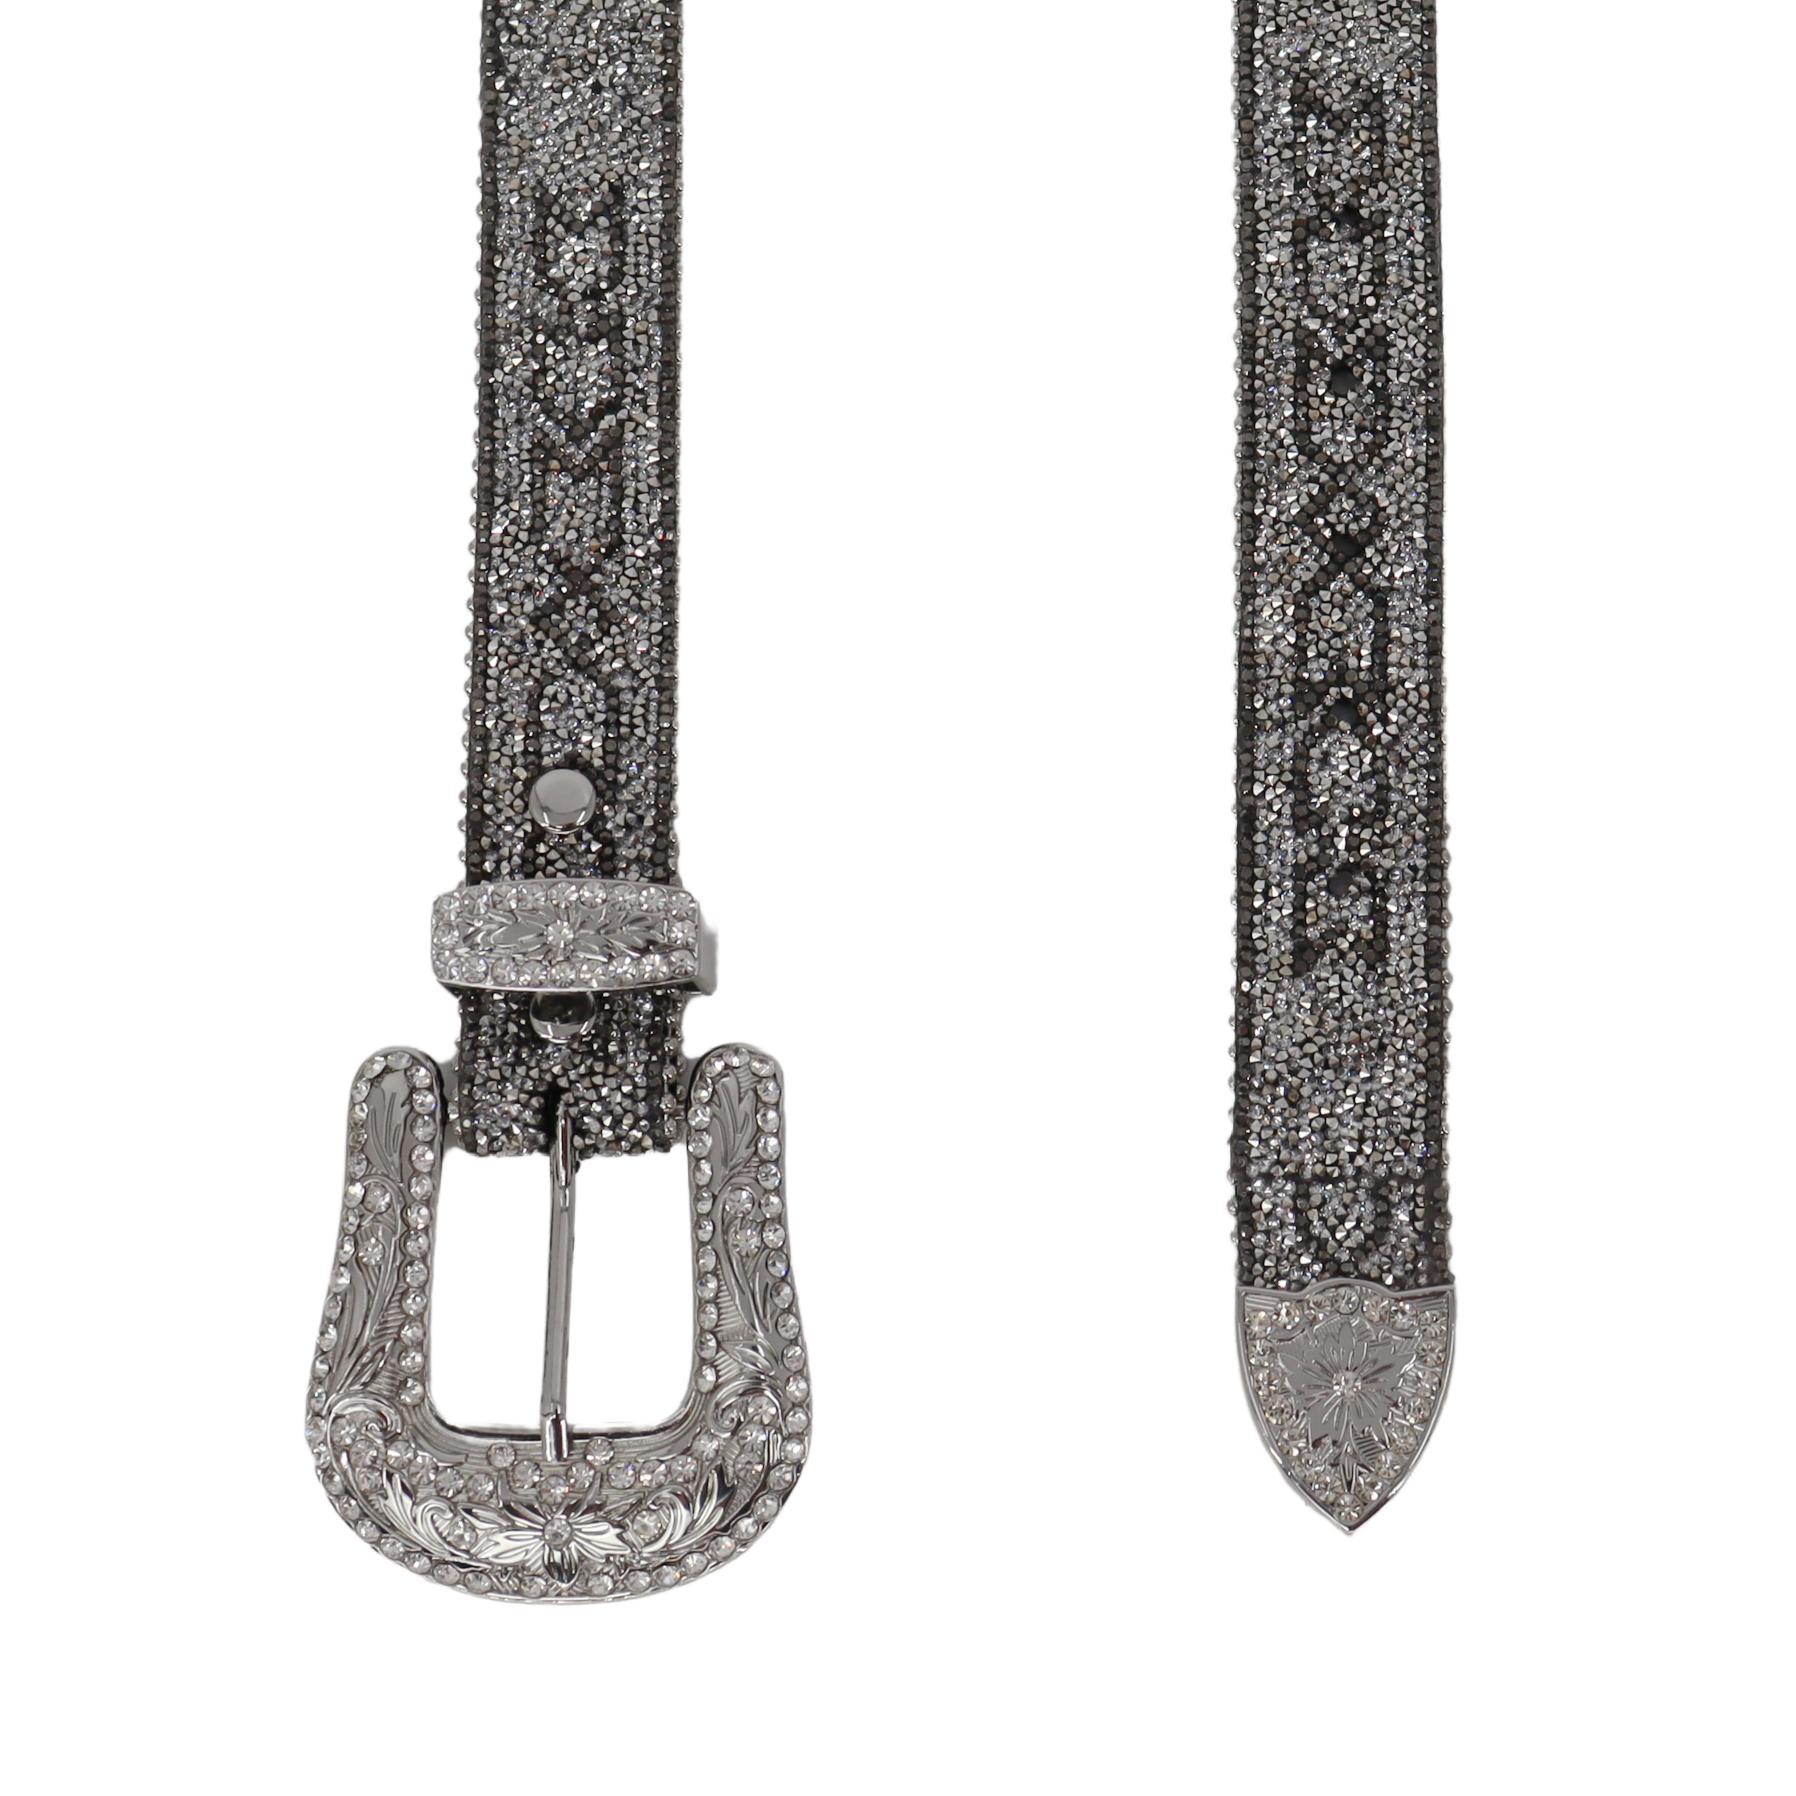 KAMBERLY Silver Mesh Stones Belt with Arrows